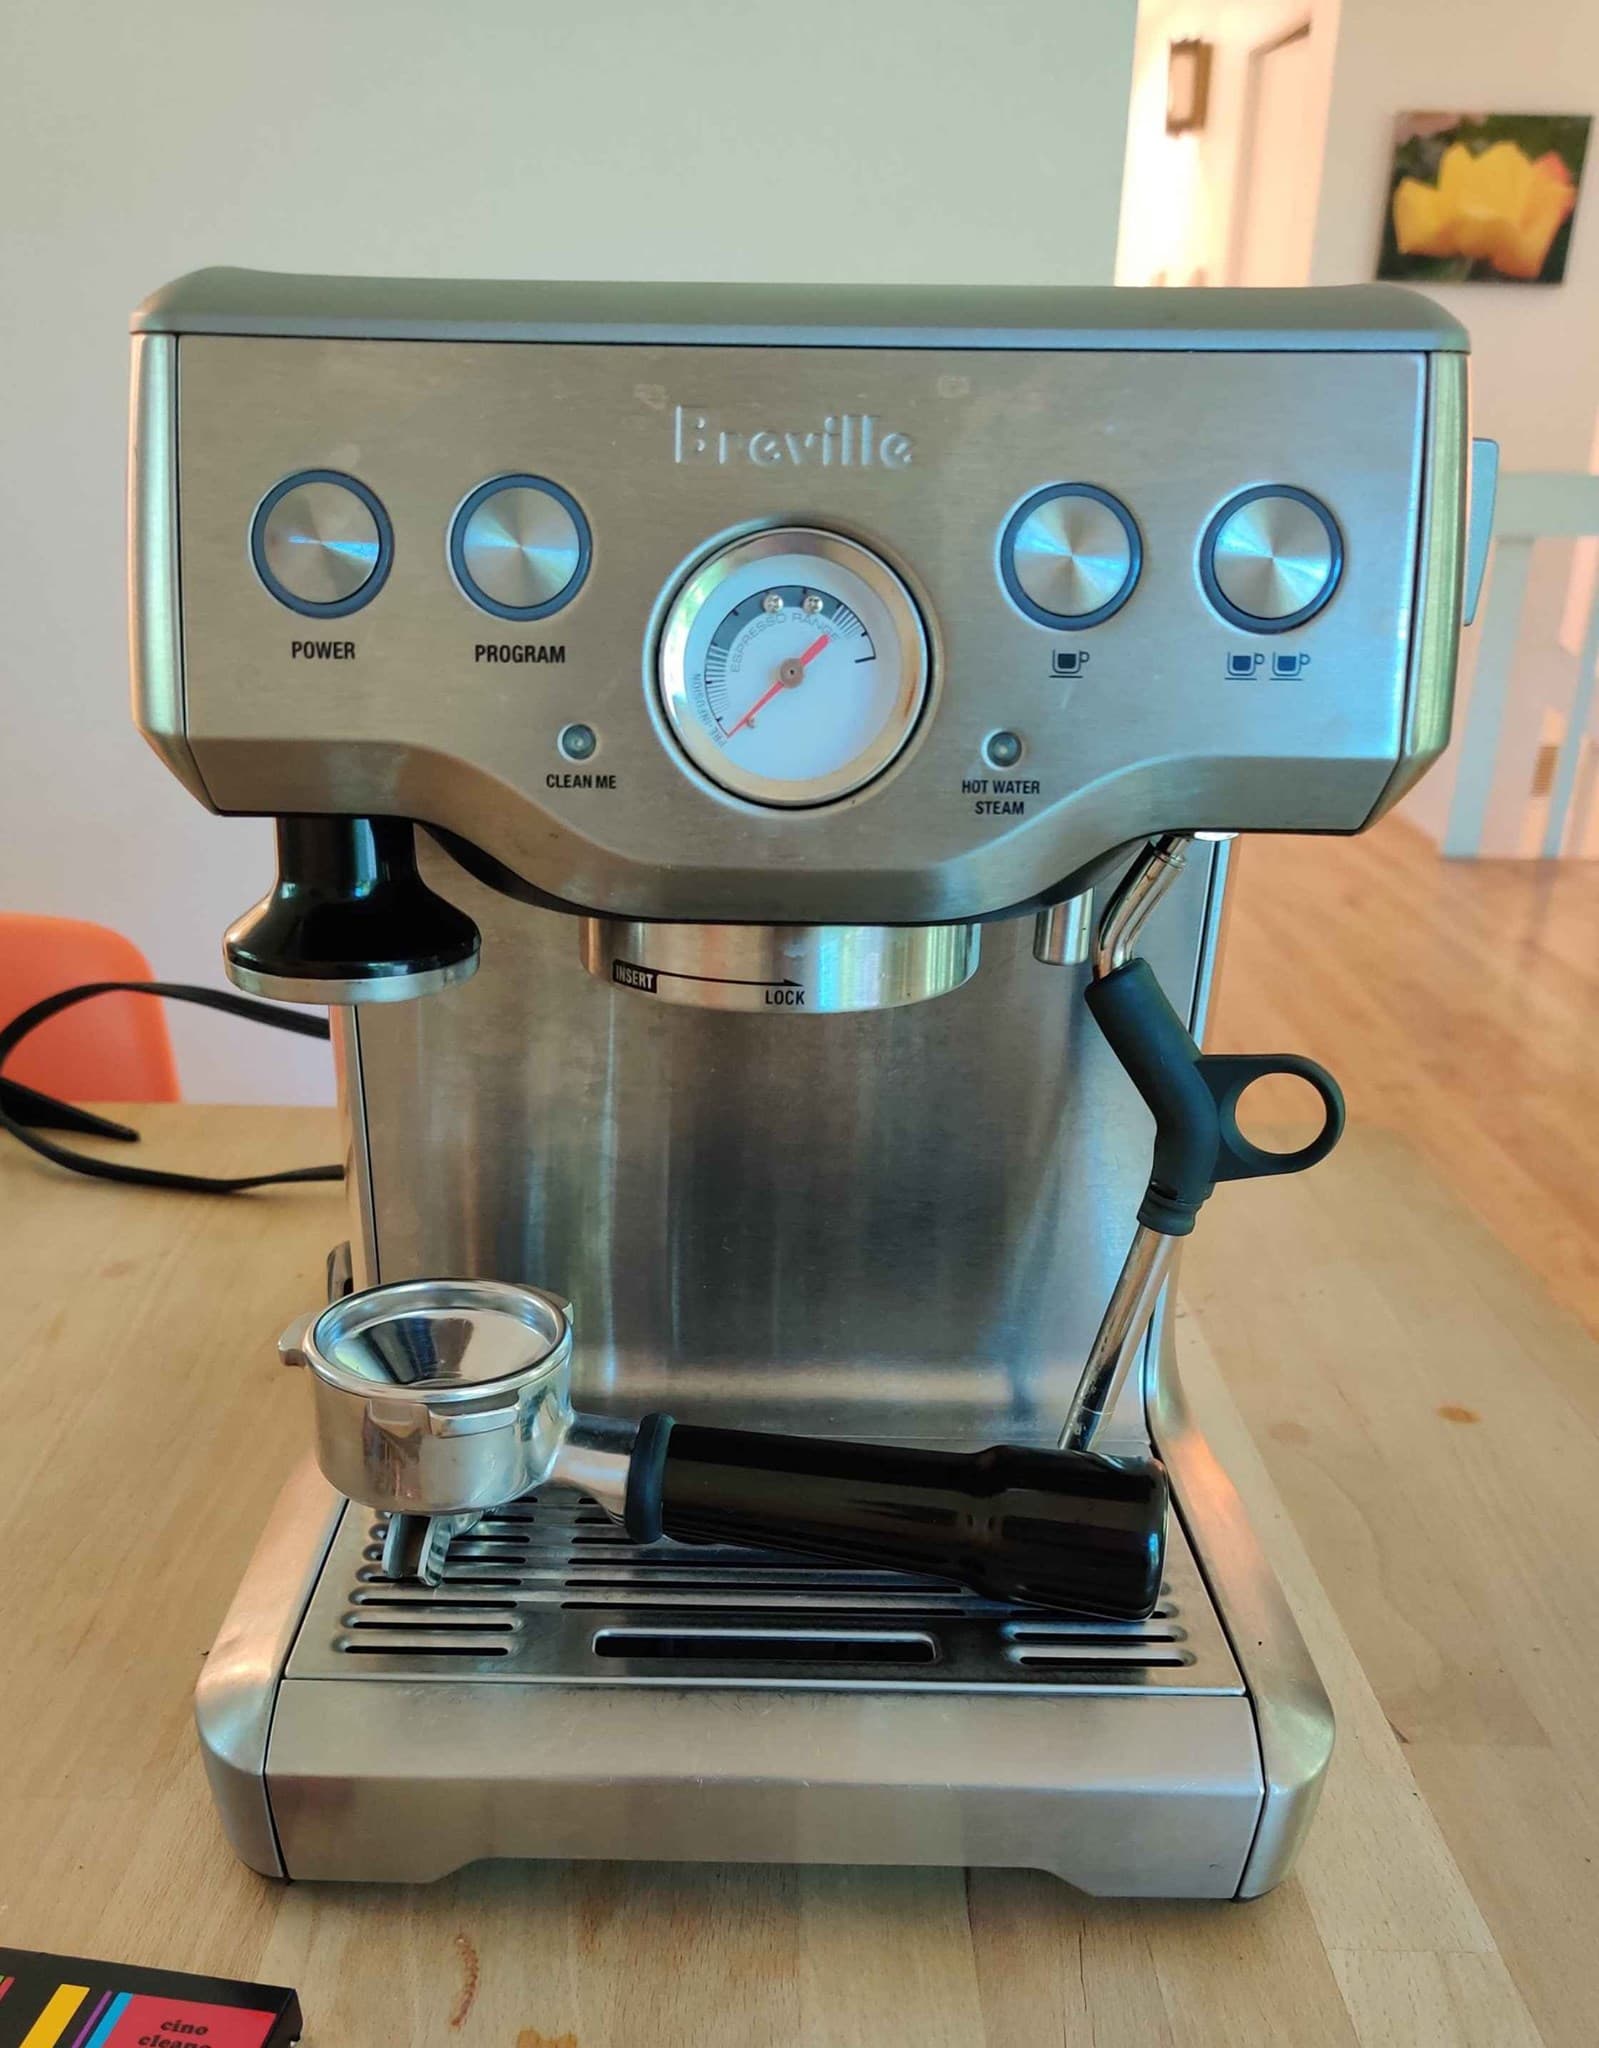 Steam wand of The Breville Infuser